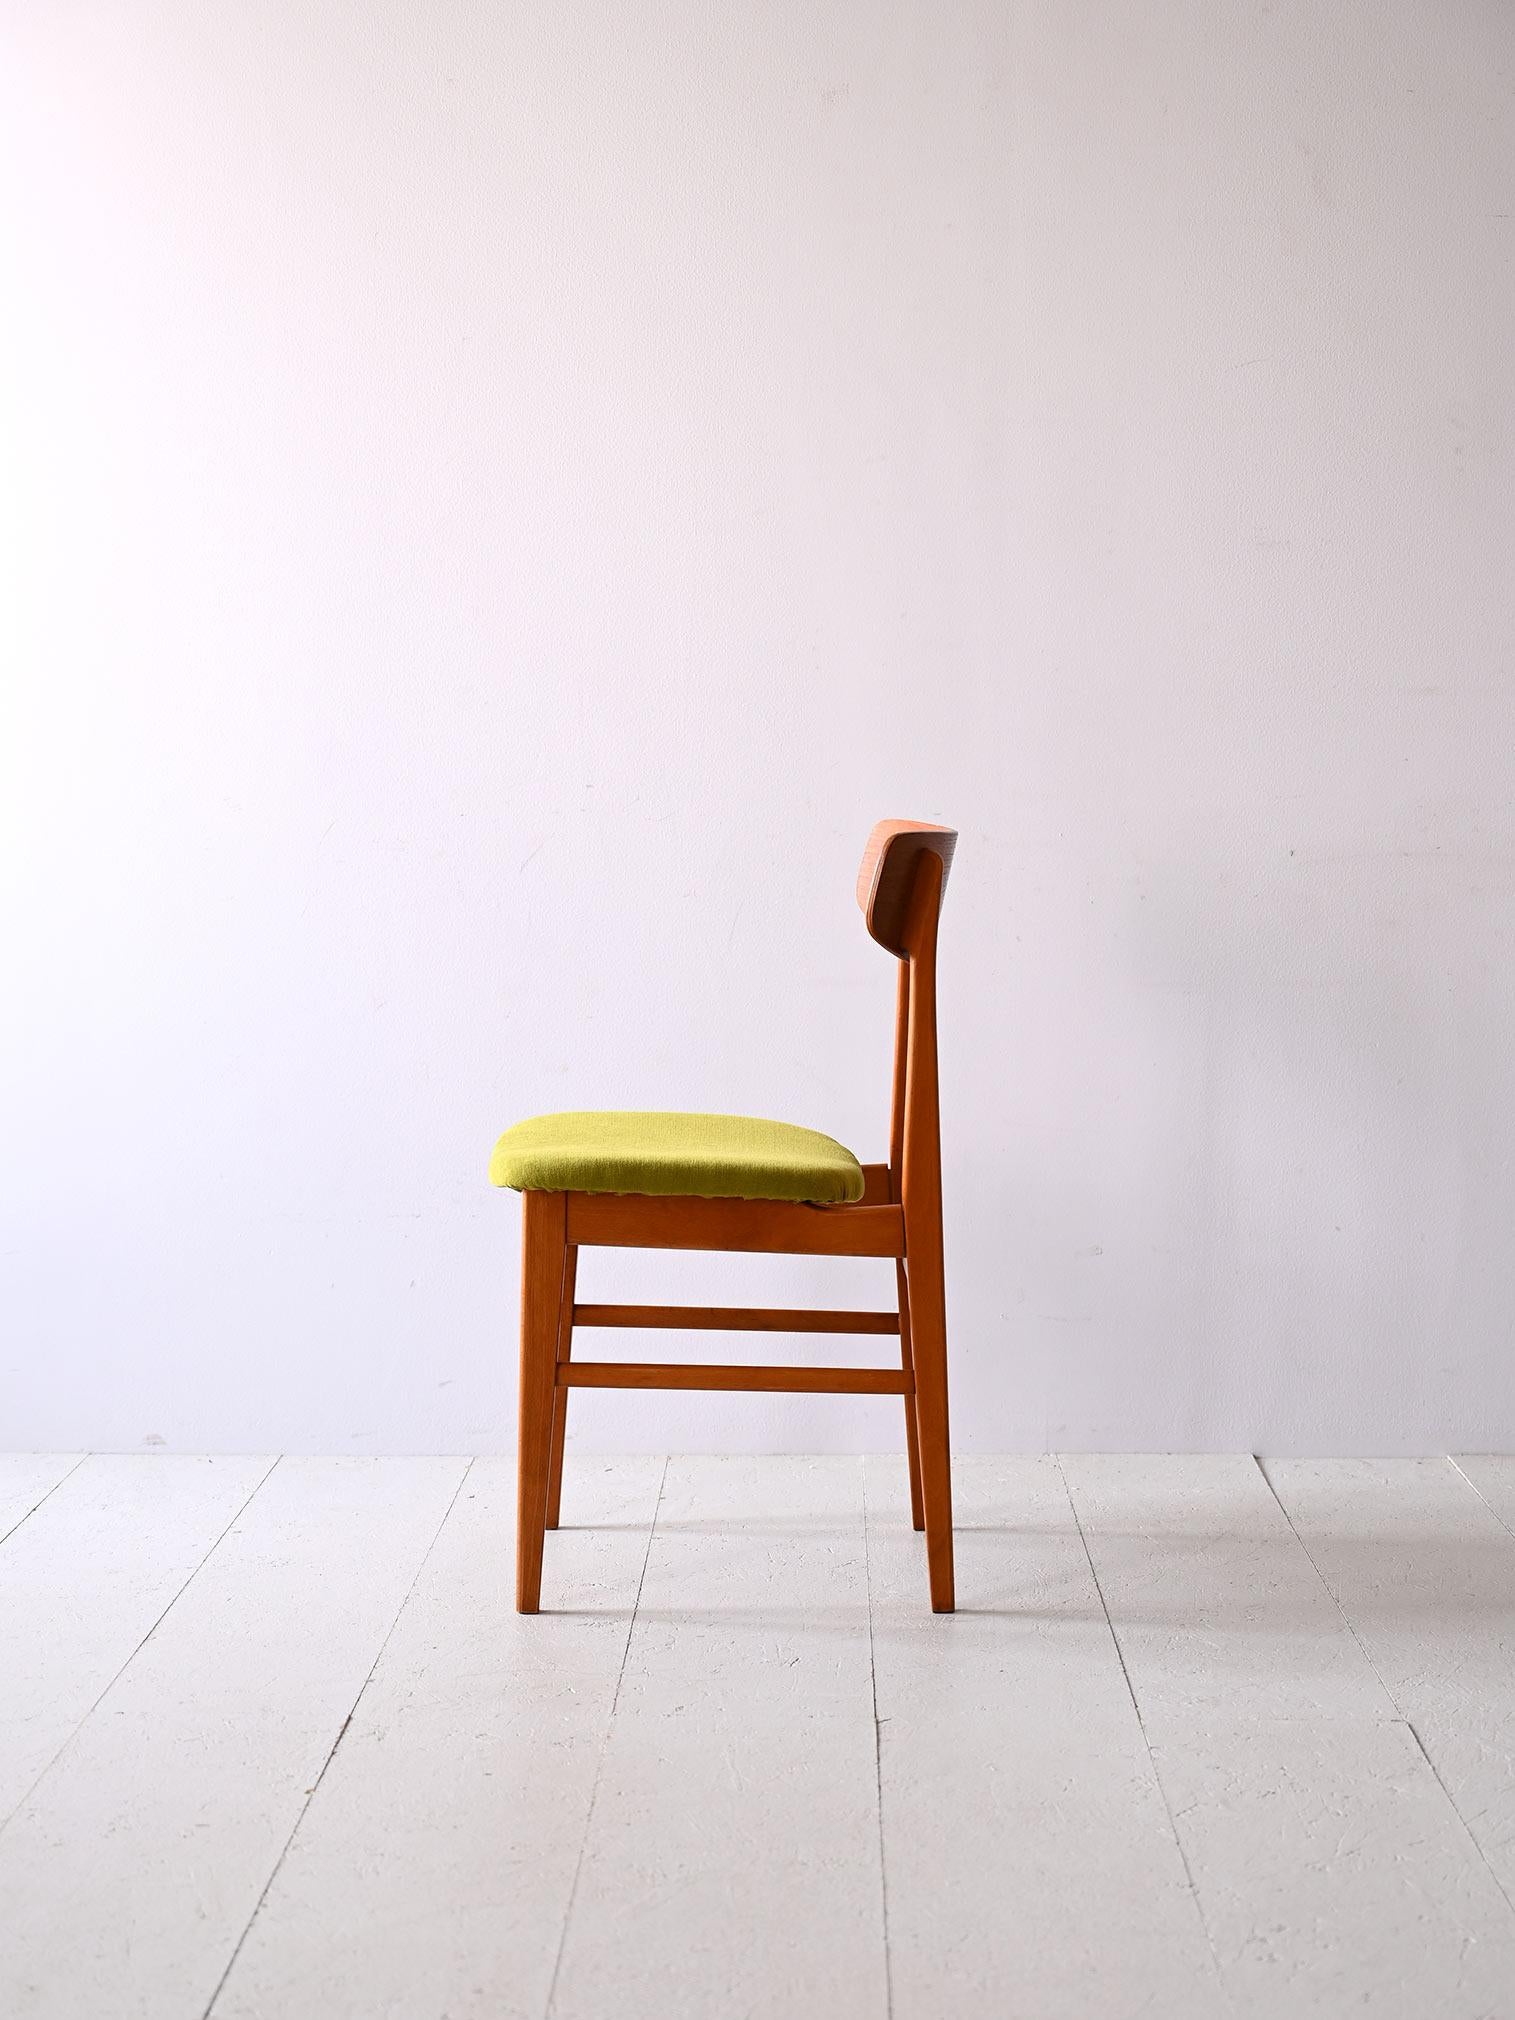 1960s wooden chair.
 
Original Scandinavian chair with simple and elegant lines. Consisting of teak wood frame, it is distinguished by the contoured shape of the backrest. The seat is upholstered and reupholstered with green-colored fabric.
